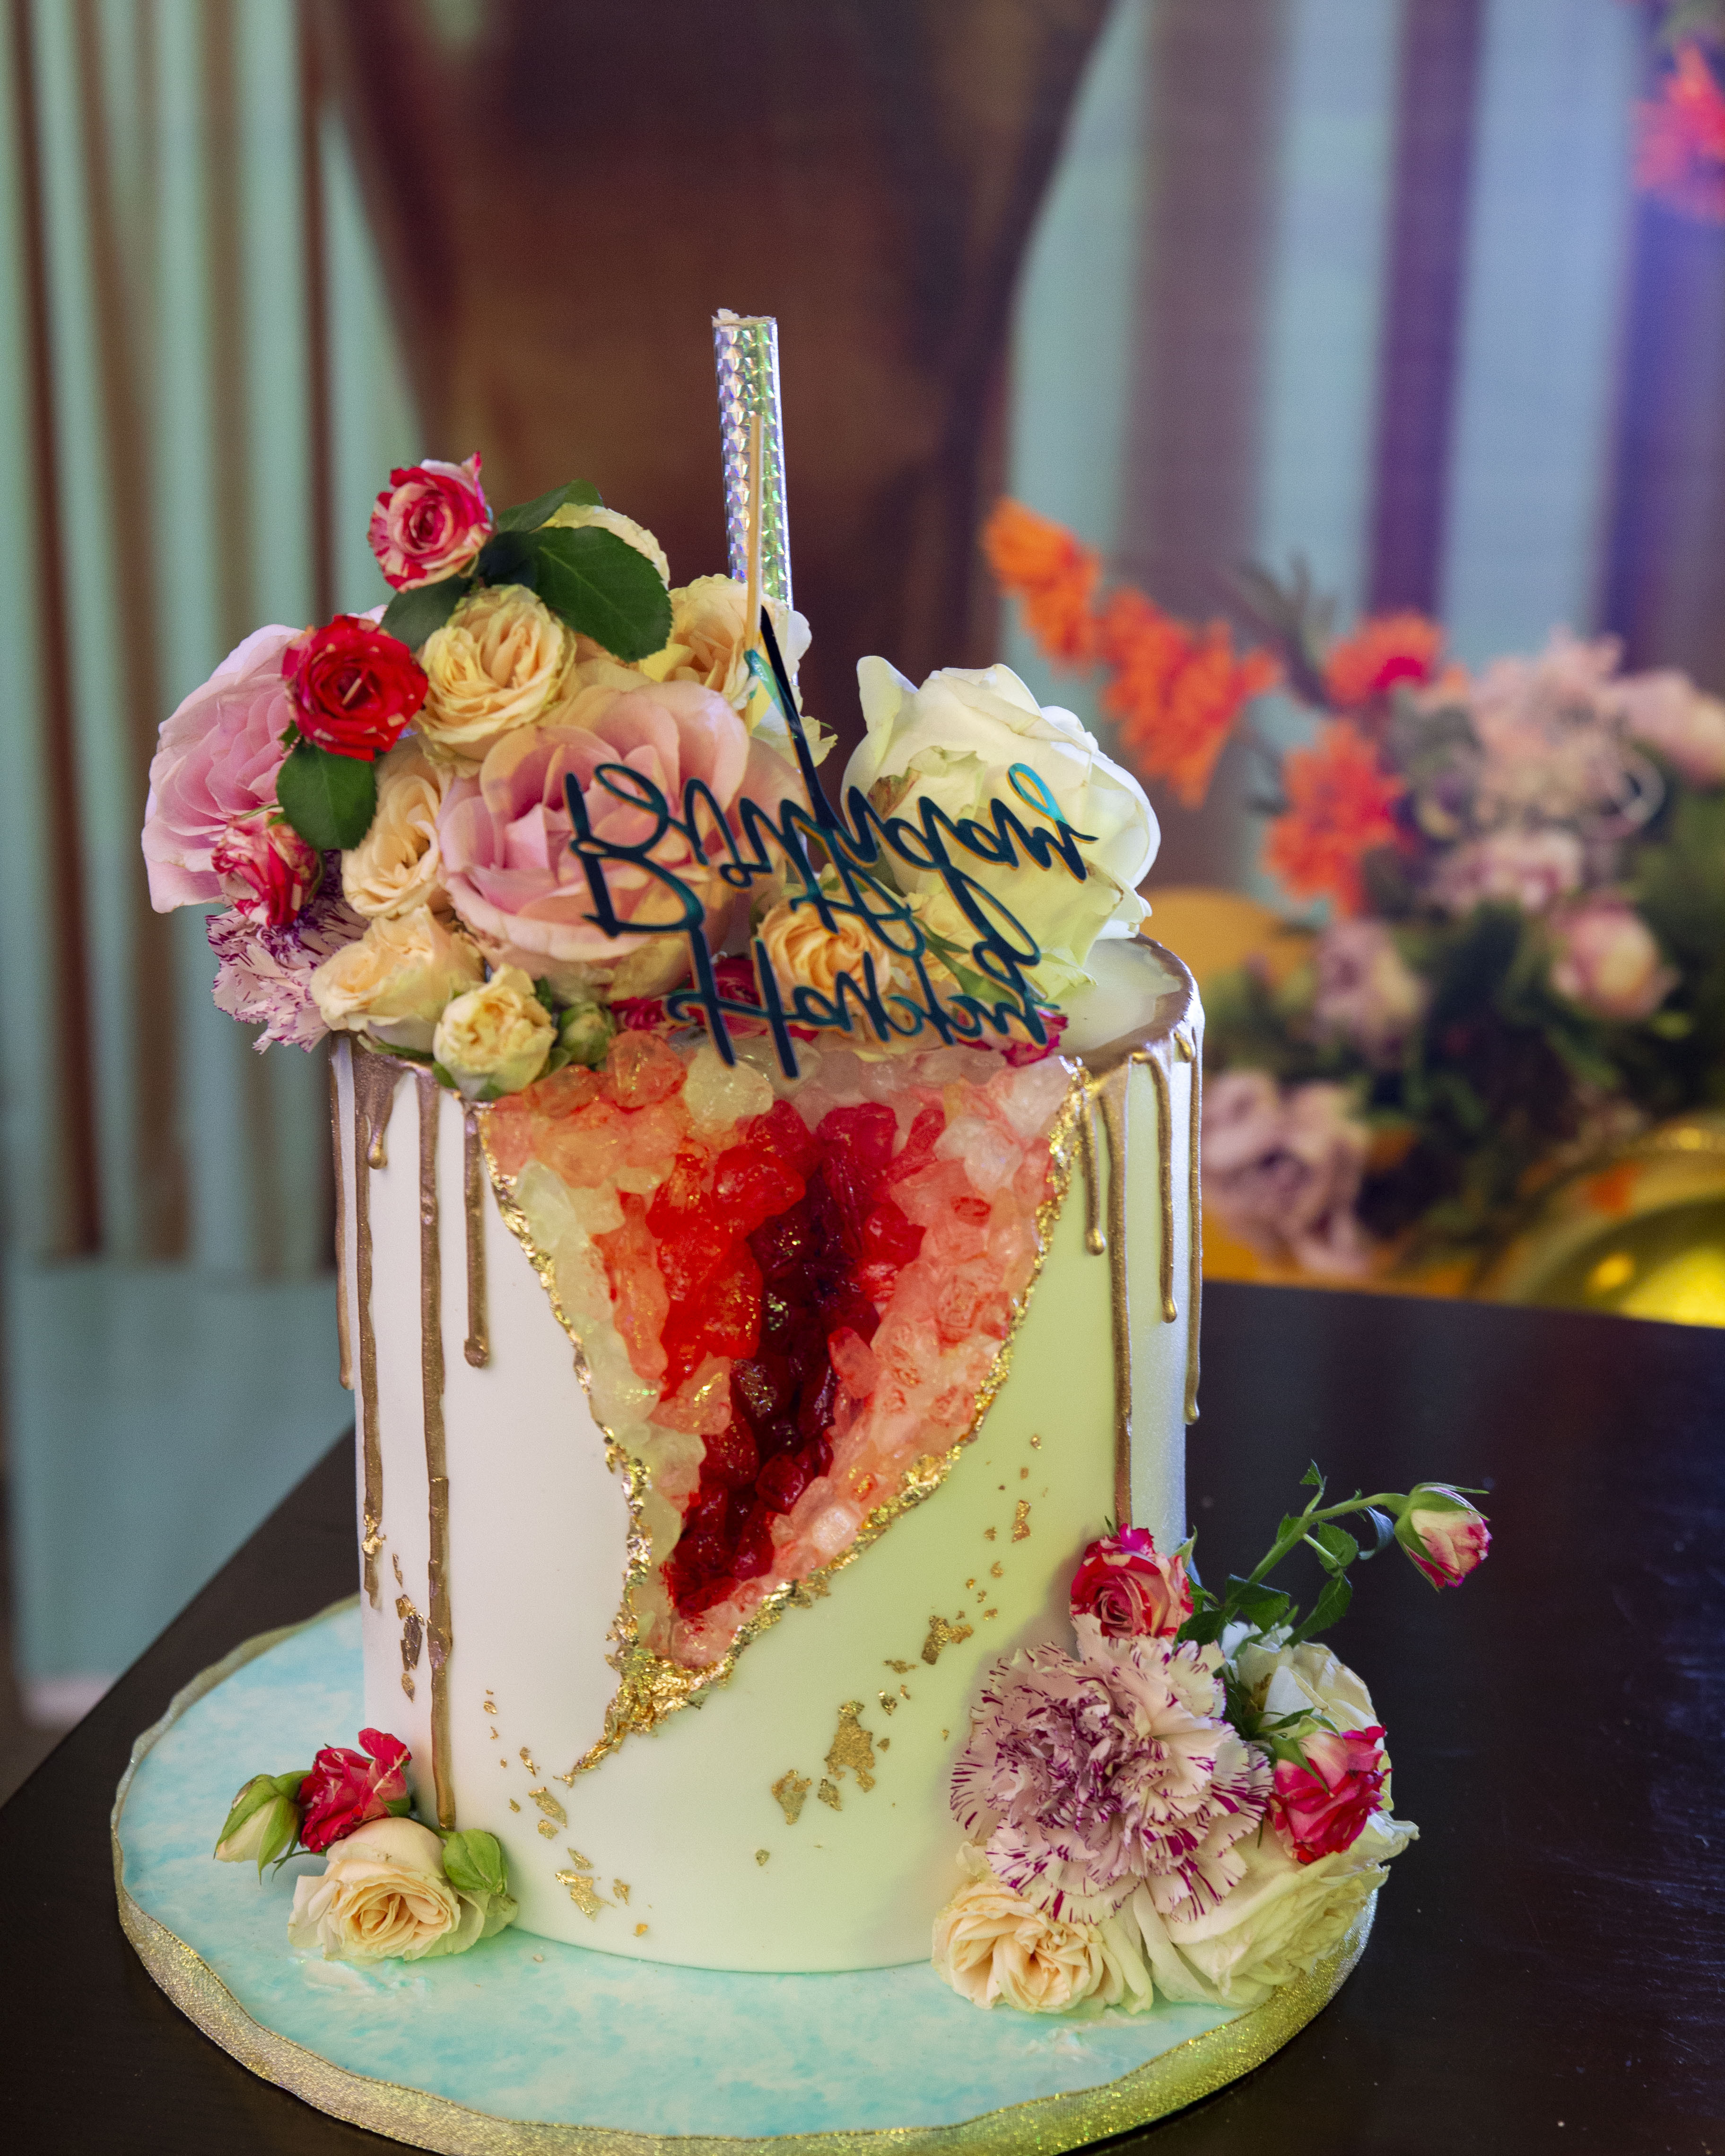 Chika Ike Throws Lavish 35th Birthday Party In Grand Style